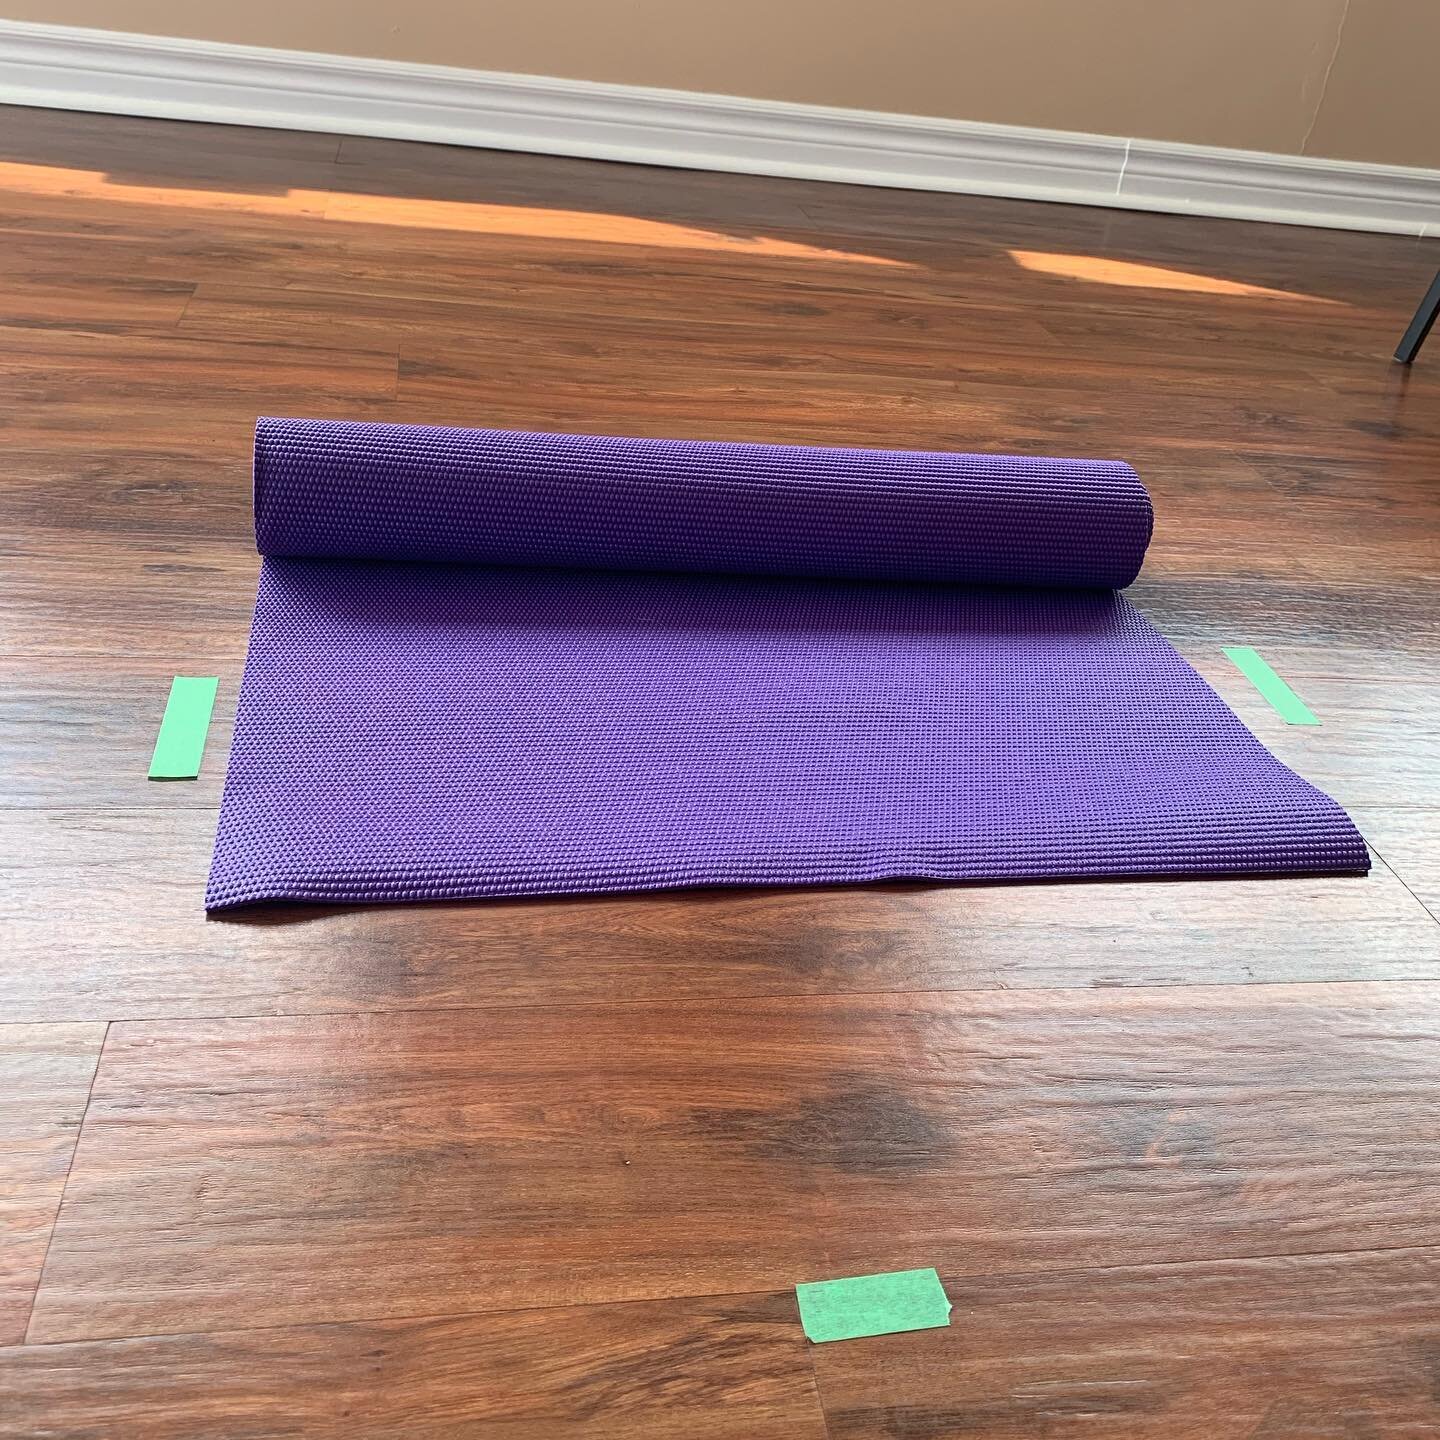 Covid protocols all in place in the studio. Socially distanced spots are all taped out. Reserve a spot today and get back to your yoga class in person. Can&rsquo;t wait to see you!